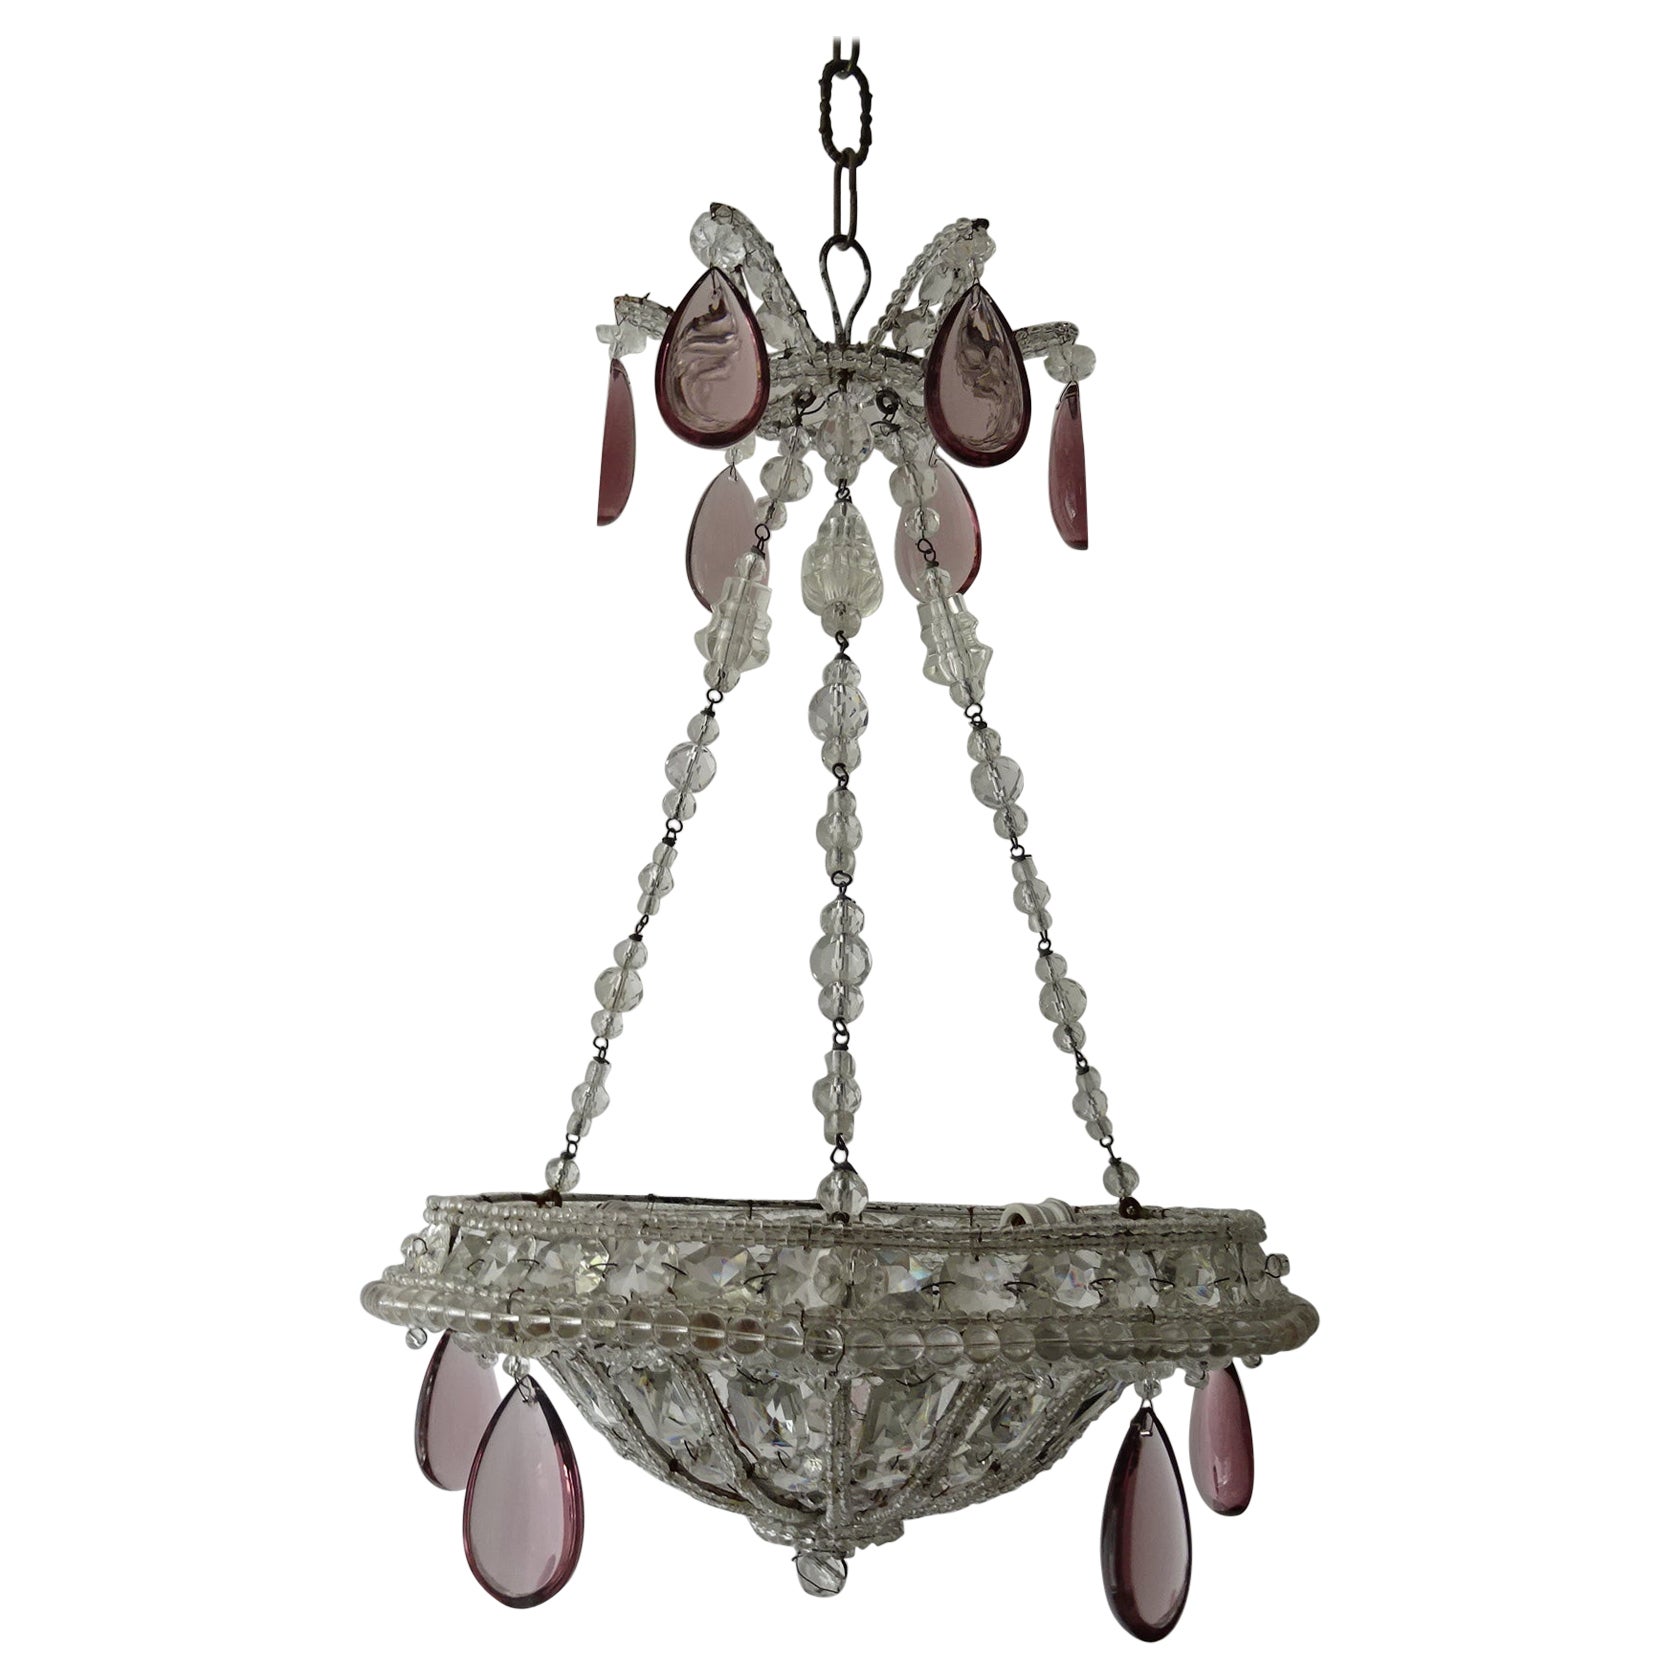  Maison 1940s Baguès Amethyst Prisms Beaded Crystal Chains Signed Chandelier For Sale